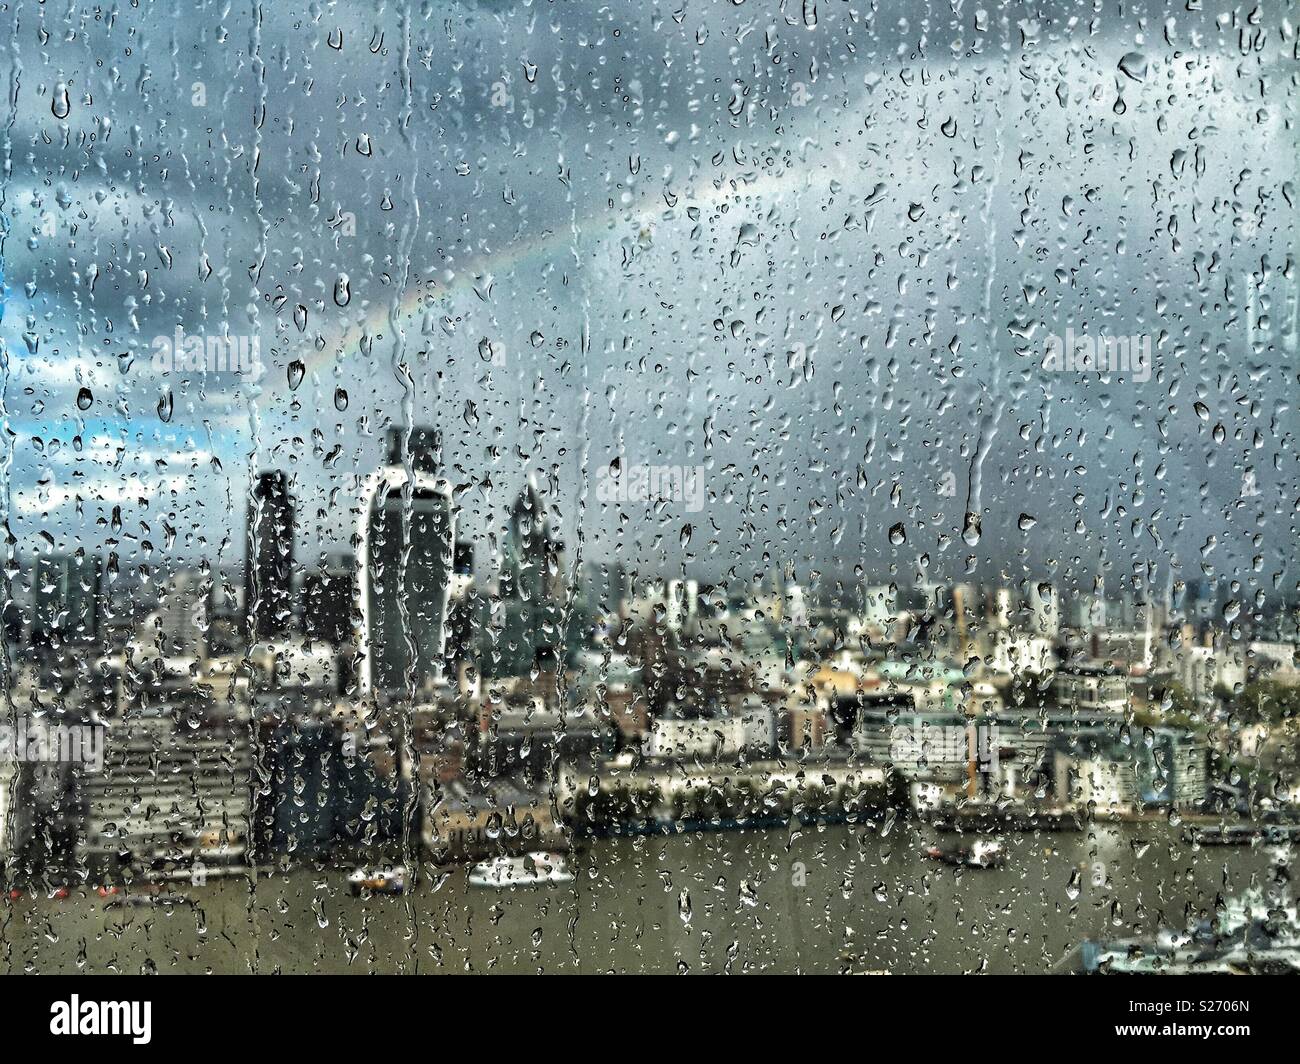 Rain on the window of The Shard, London, UK, looking across the Thames towards Fenchurch Street and over the City. A rainbow lights up the sky as the sun breaks through, lighting up the city below. Stock Photo